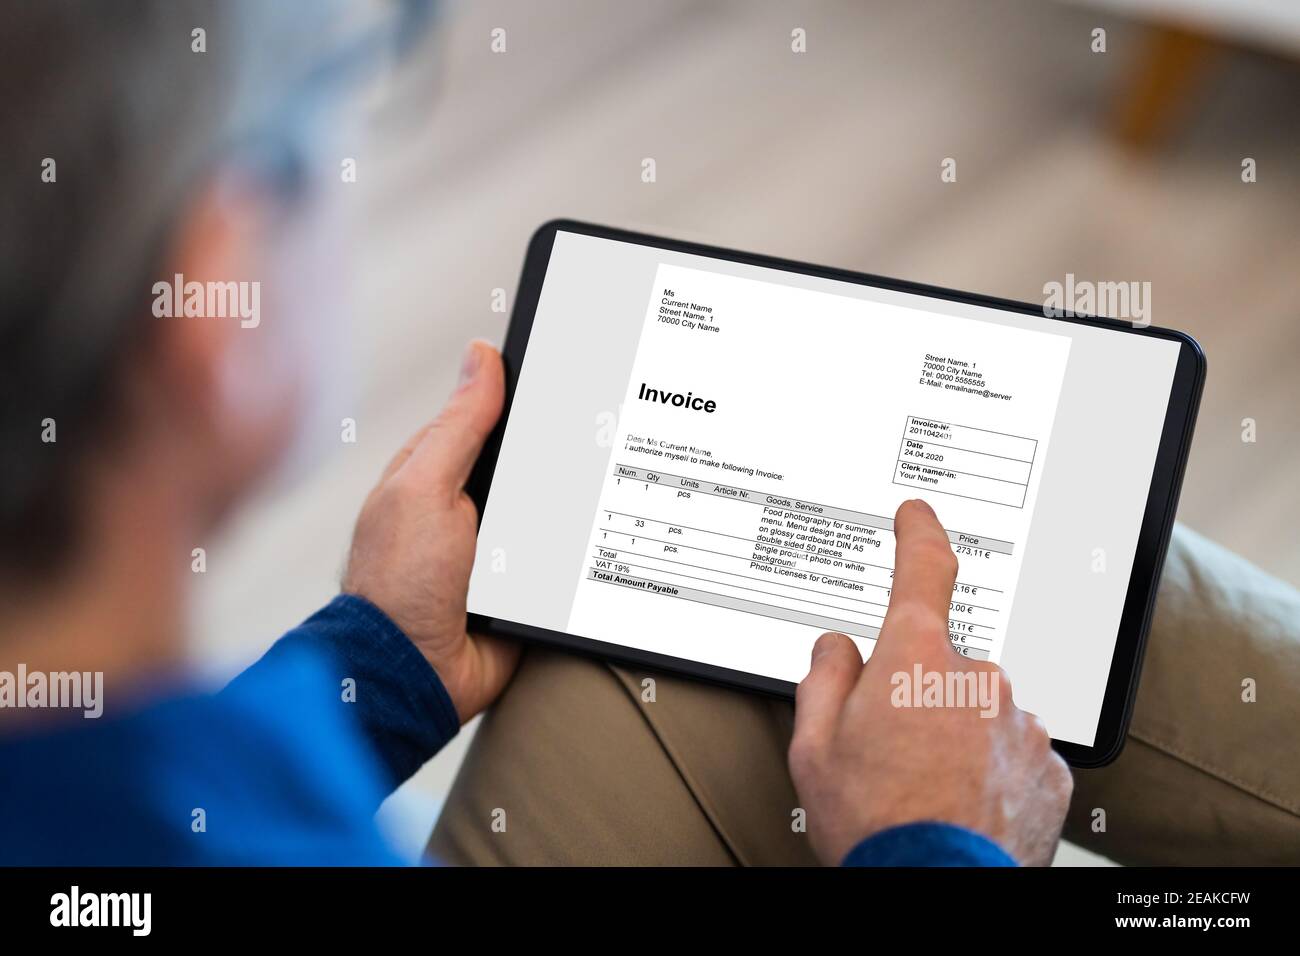 E Invoice Electronic Accounting Software Stock Photo